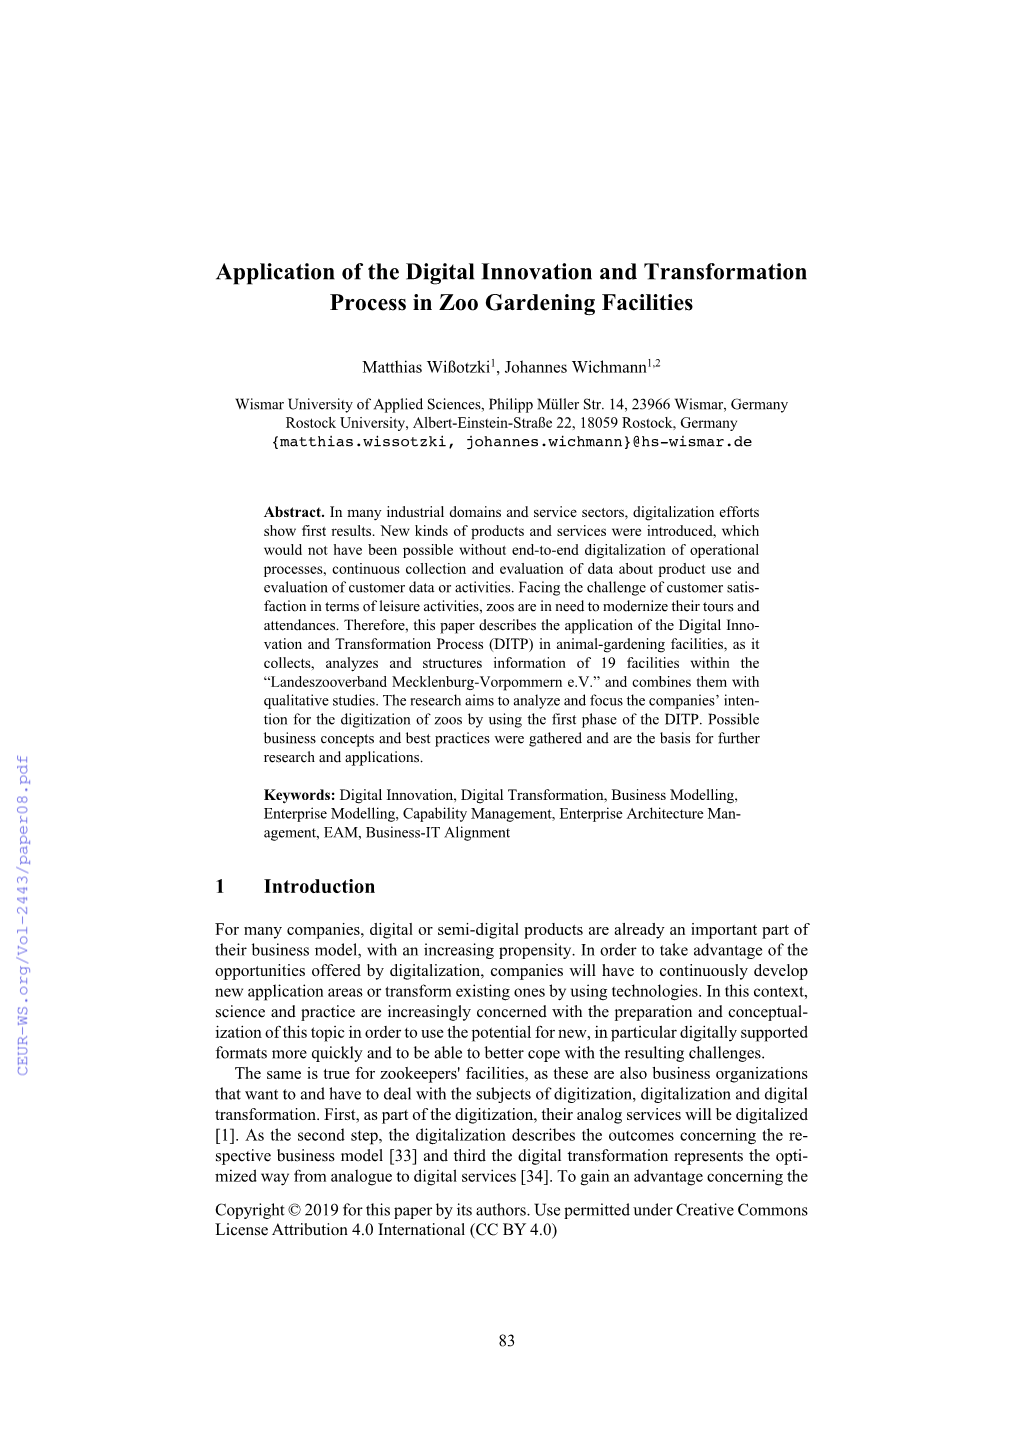 Application of the Digital Innovation and Transformation Process in Zoo Gardening Facilities